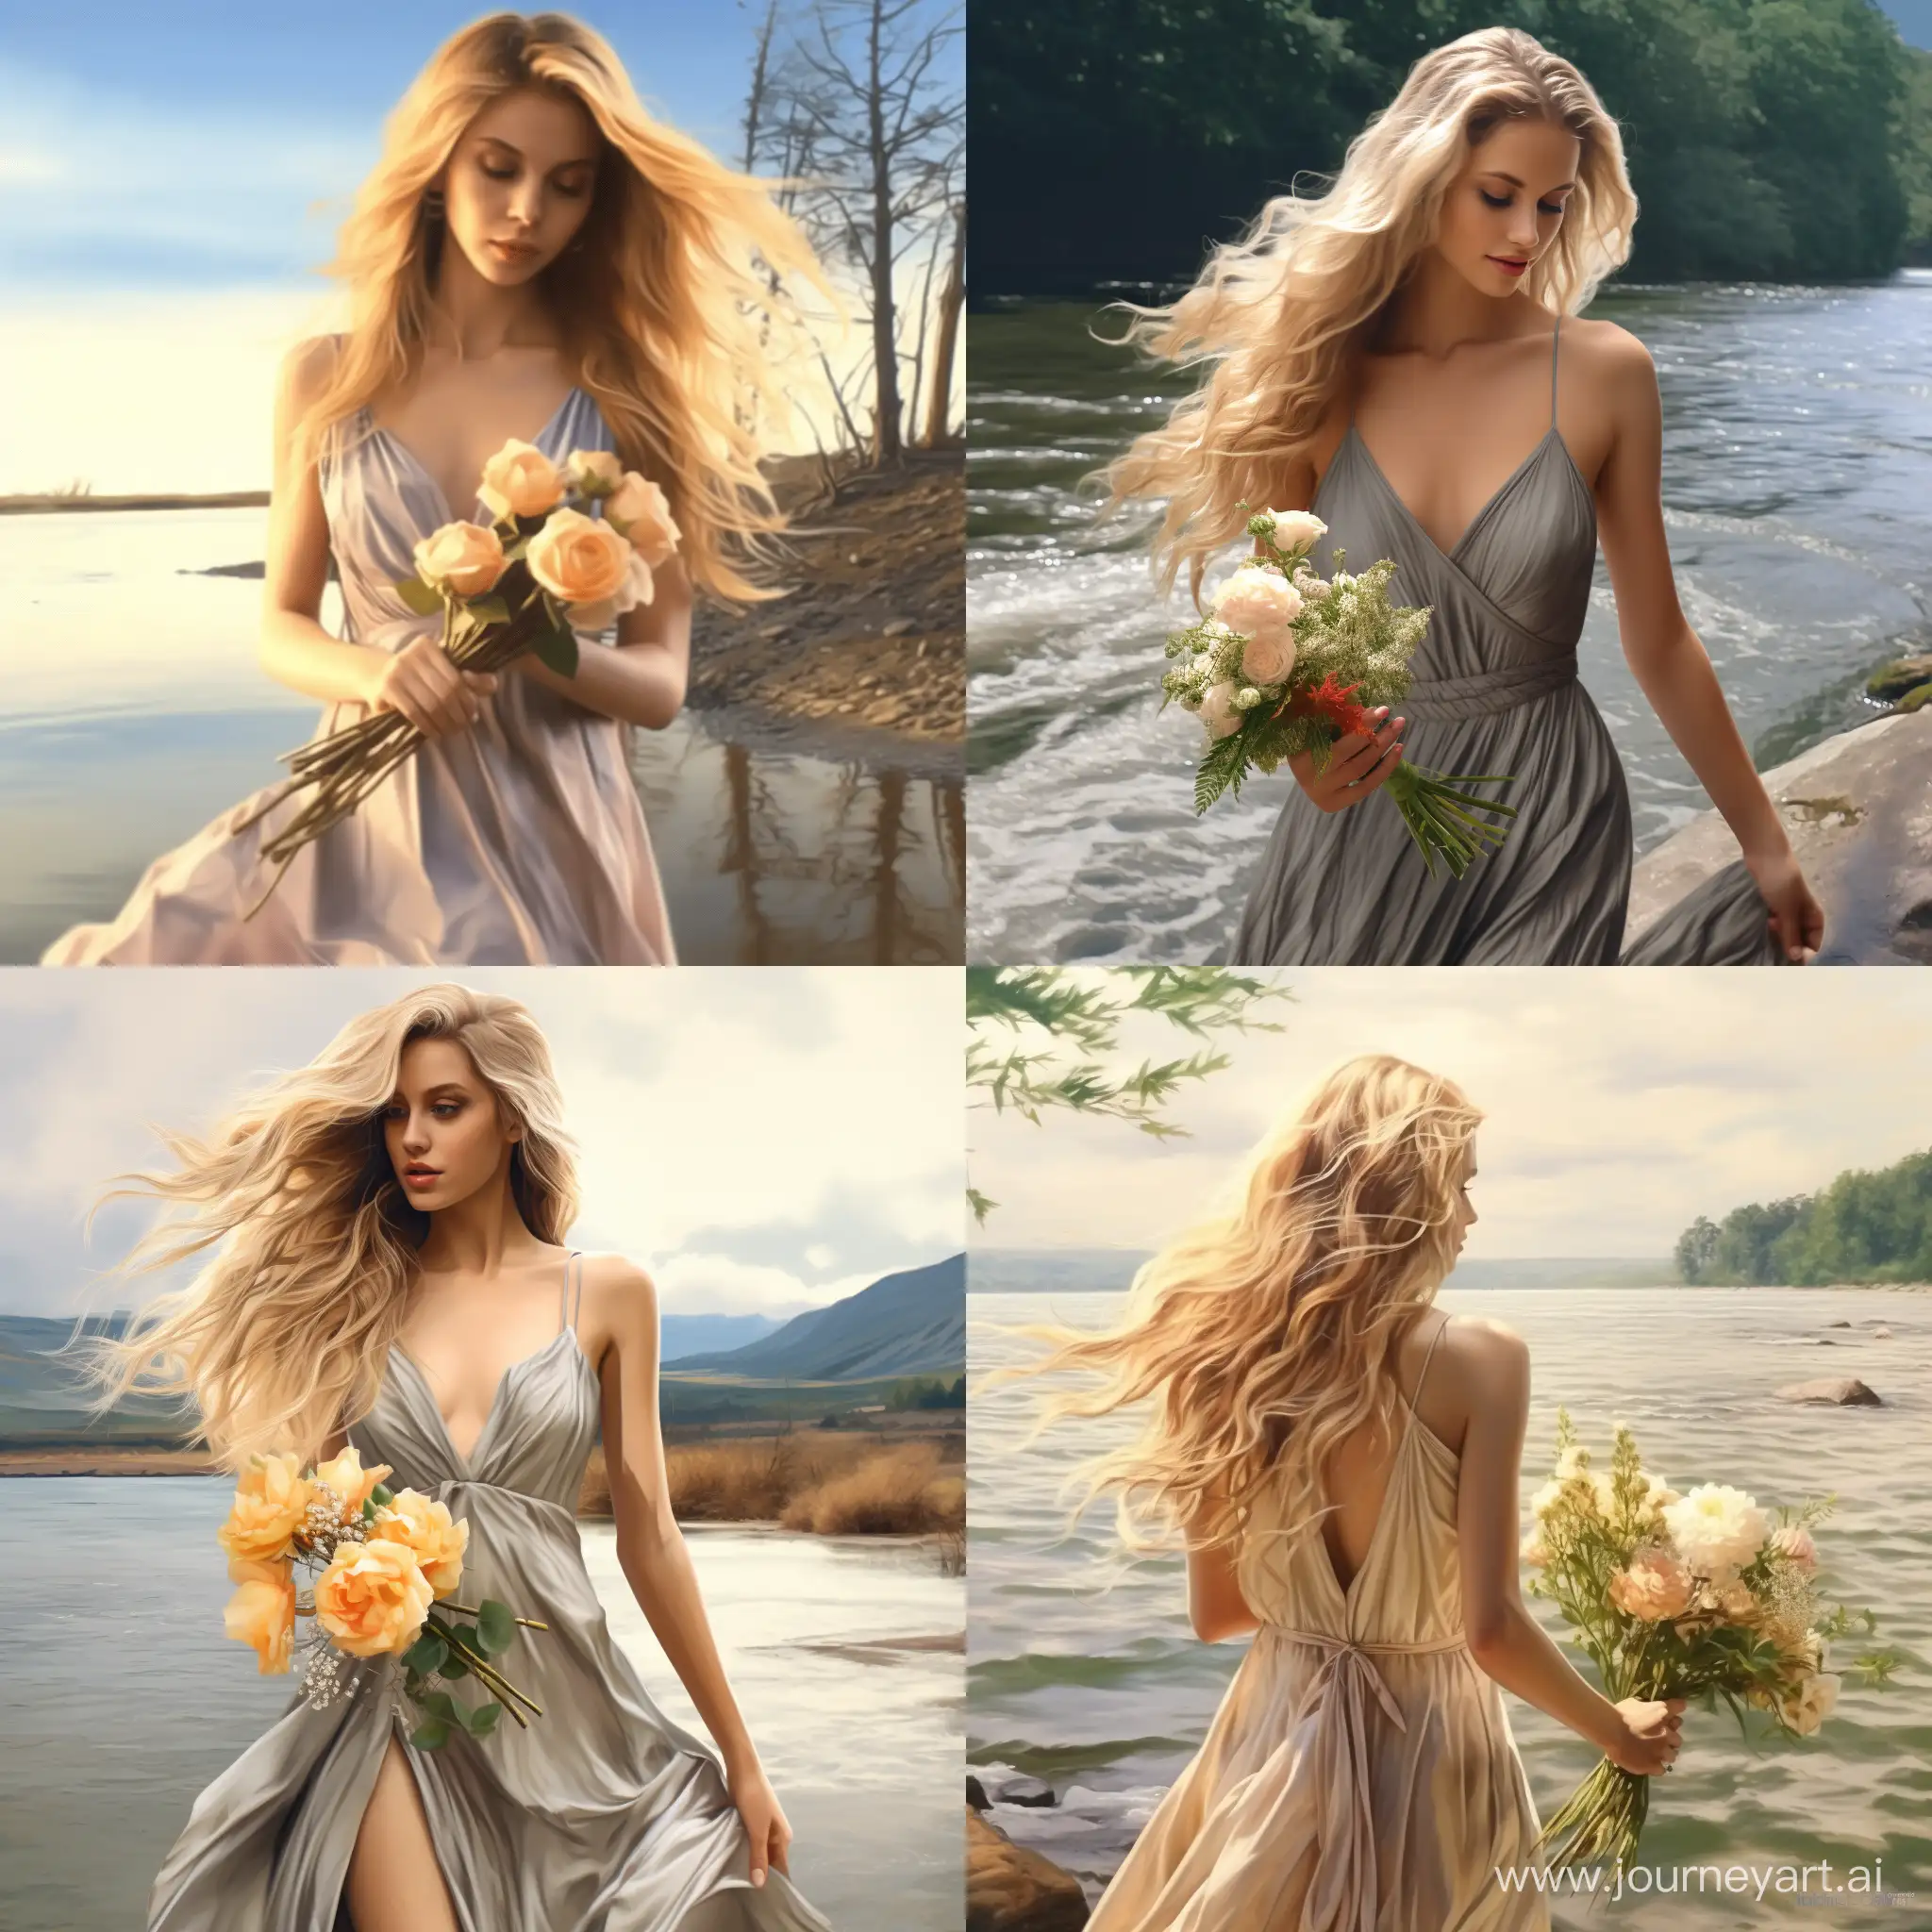 Elegant-Woman-in-Long-Flowing-Dress-Walking-by-the-River-with-Flower-Bouquet